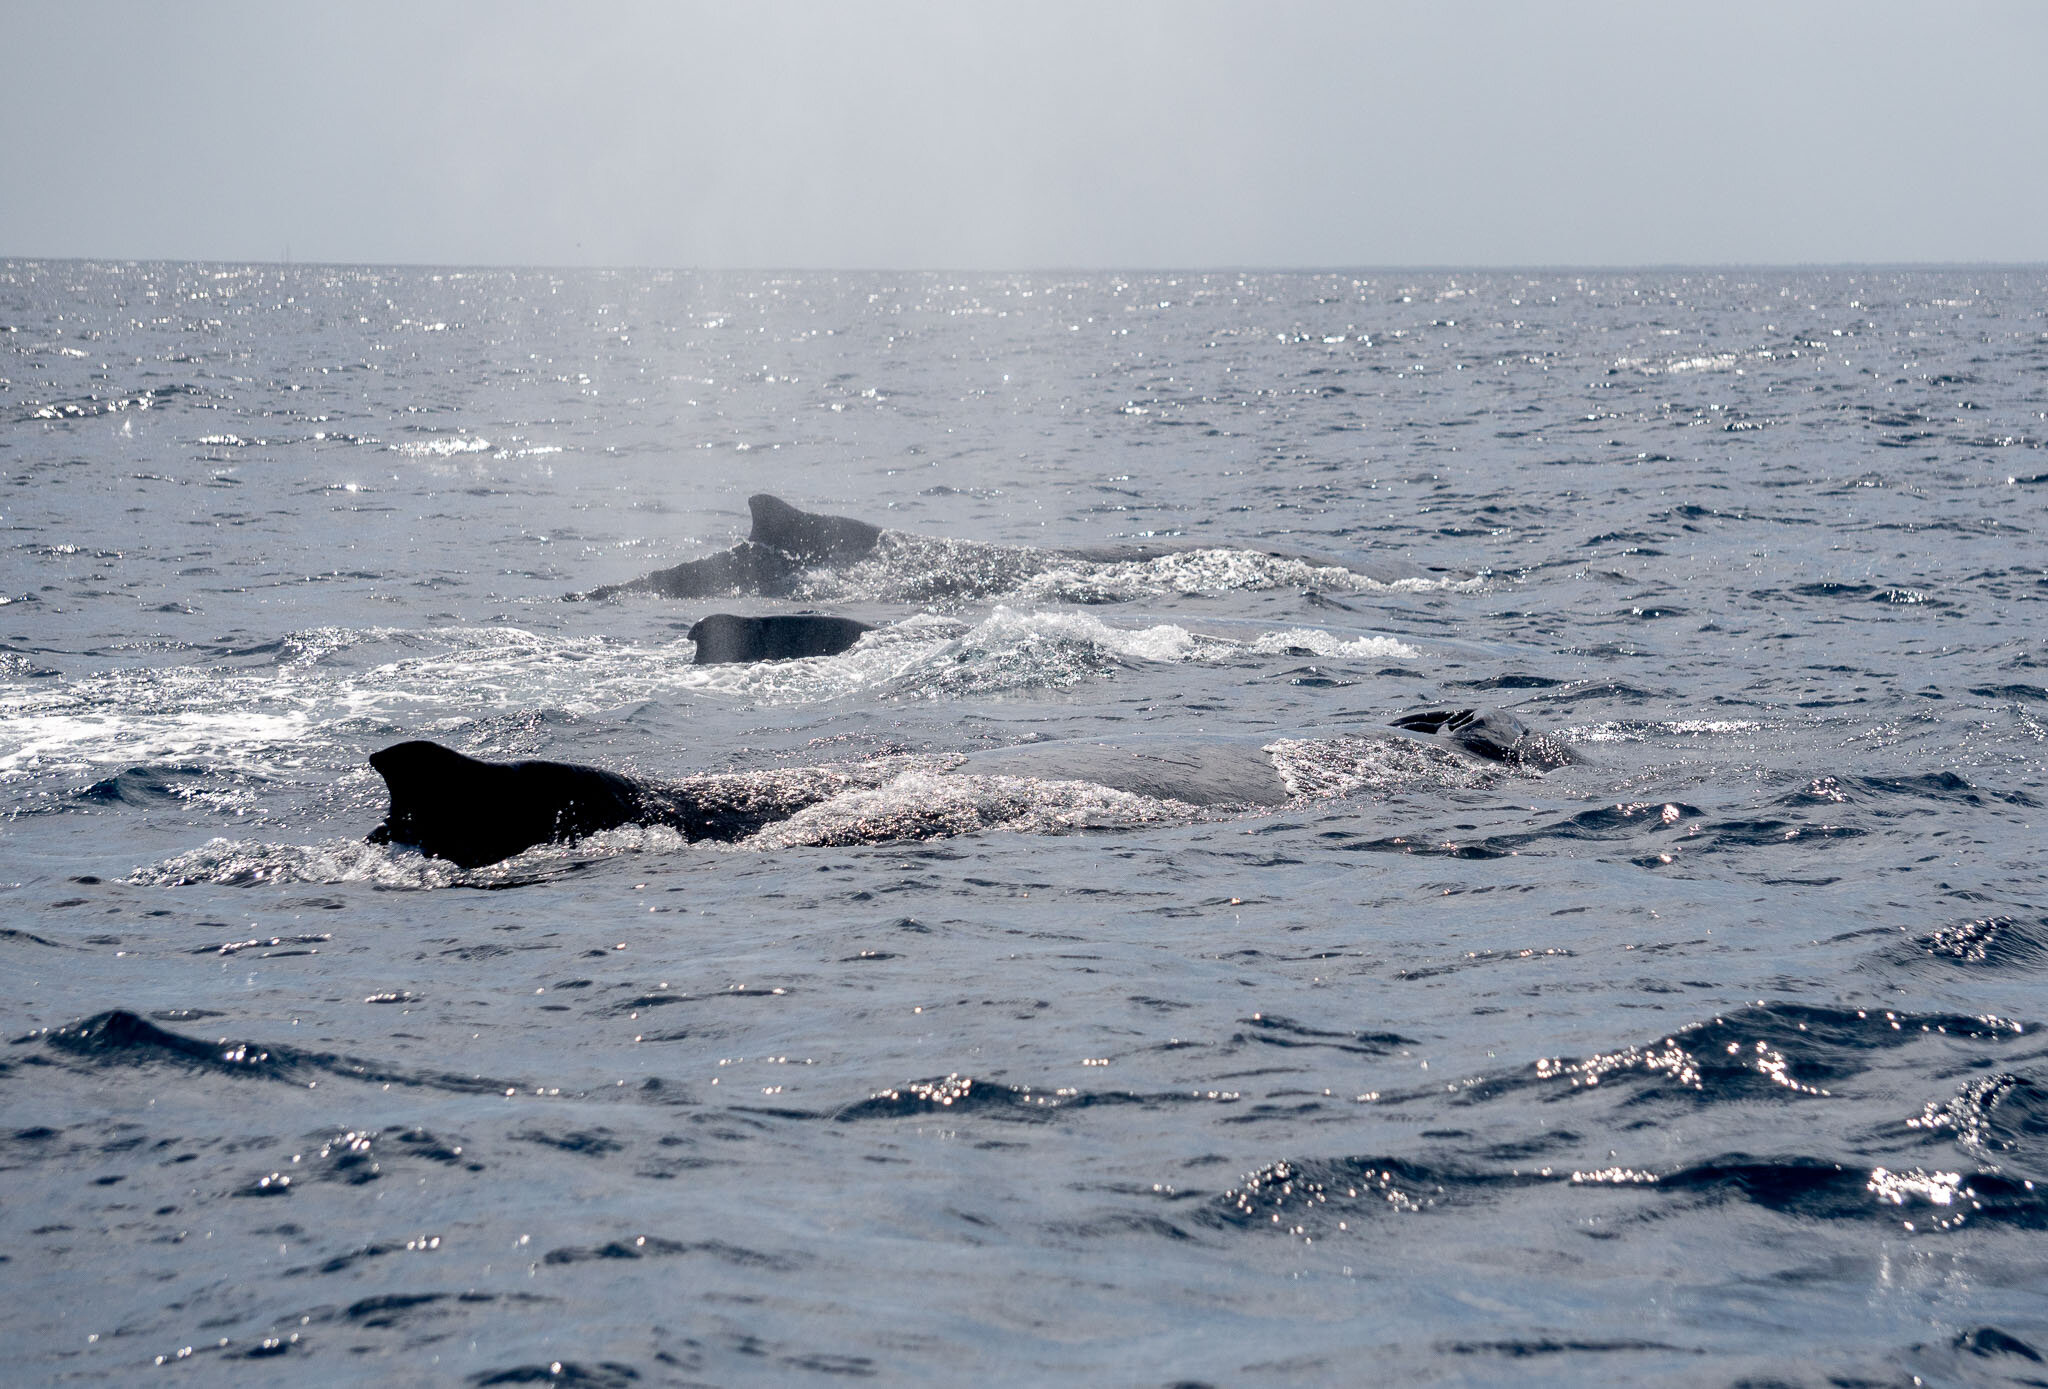 A humpback whale competition group